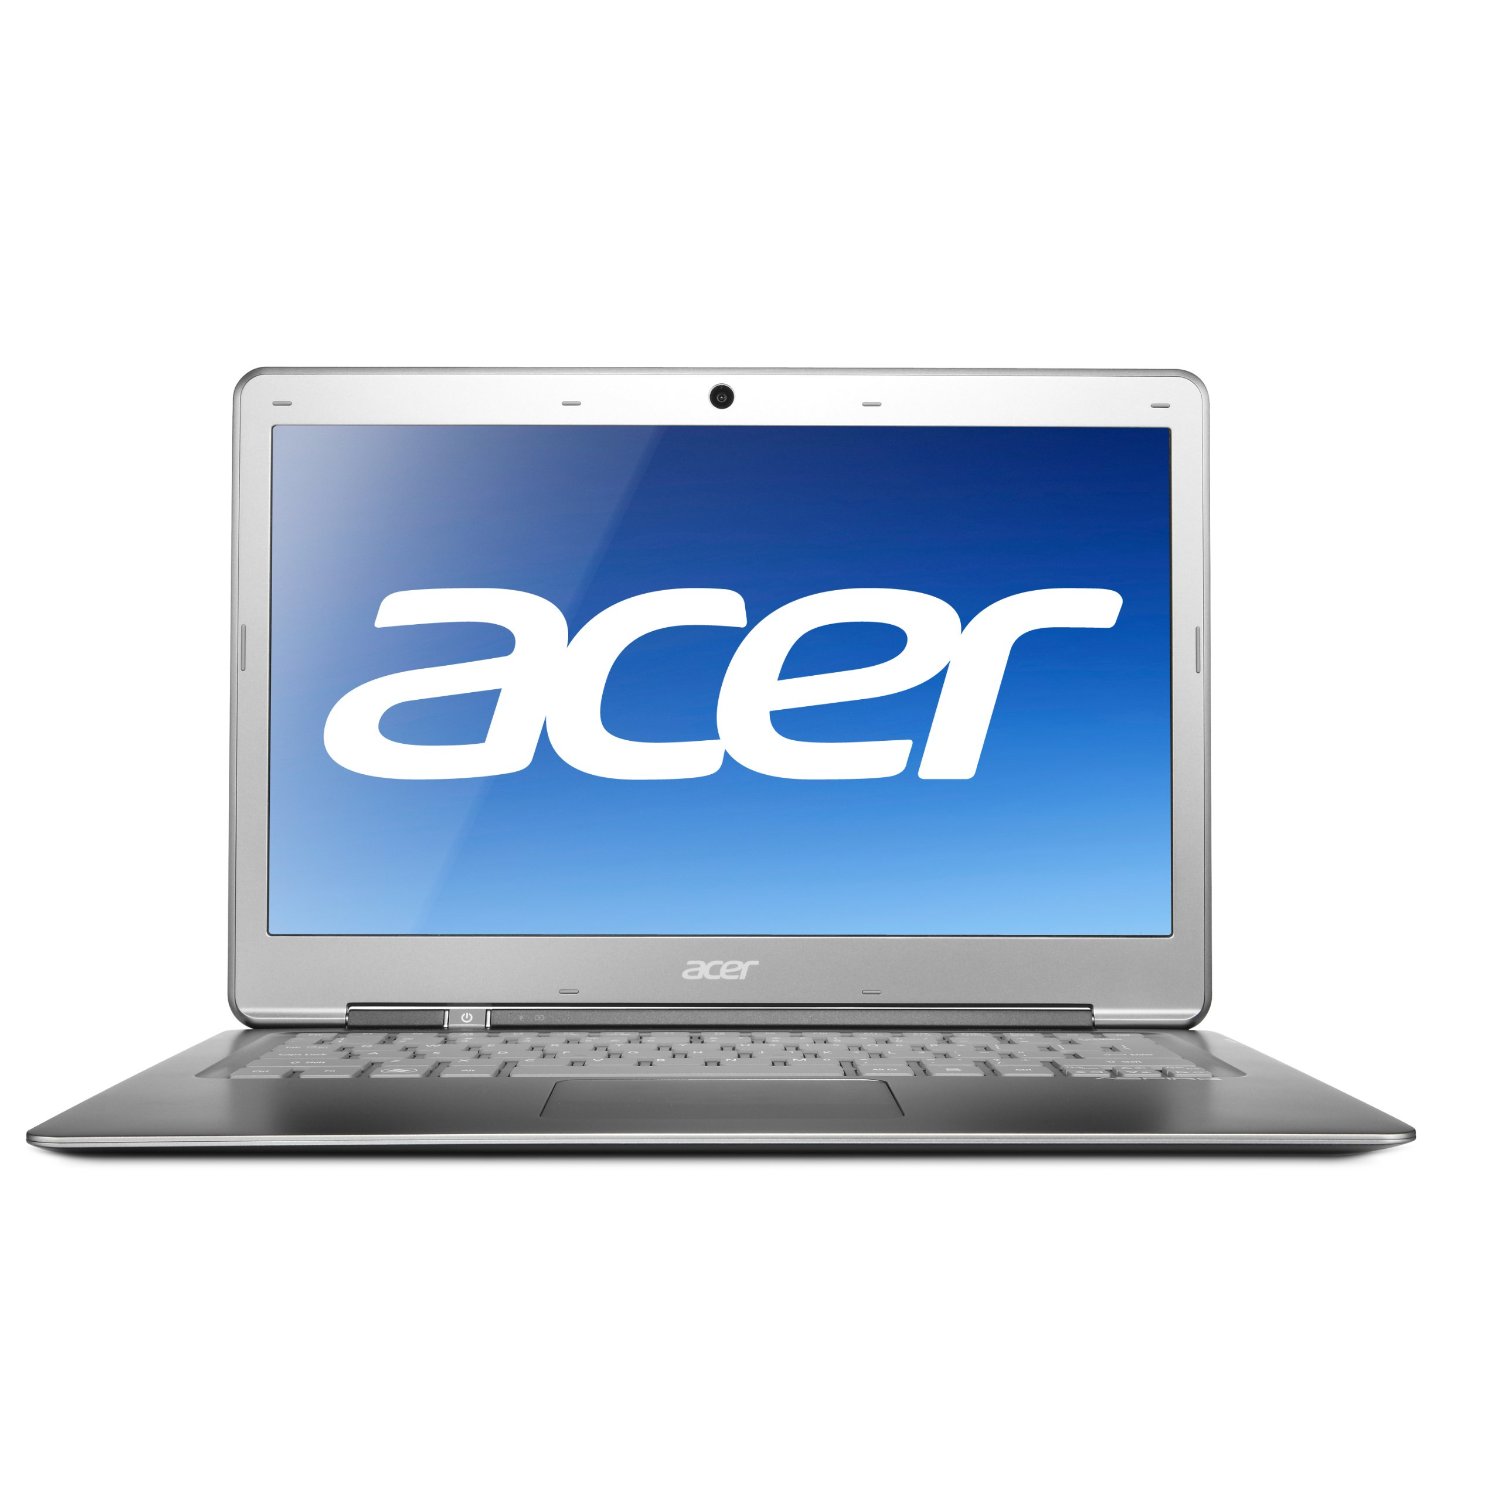 http://thetechjournal.com/wp-content/uploads/images/1204/1335733207-acers-new-aspire-s3-133inch-hd-display-ultrabook-1.jpg